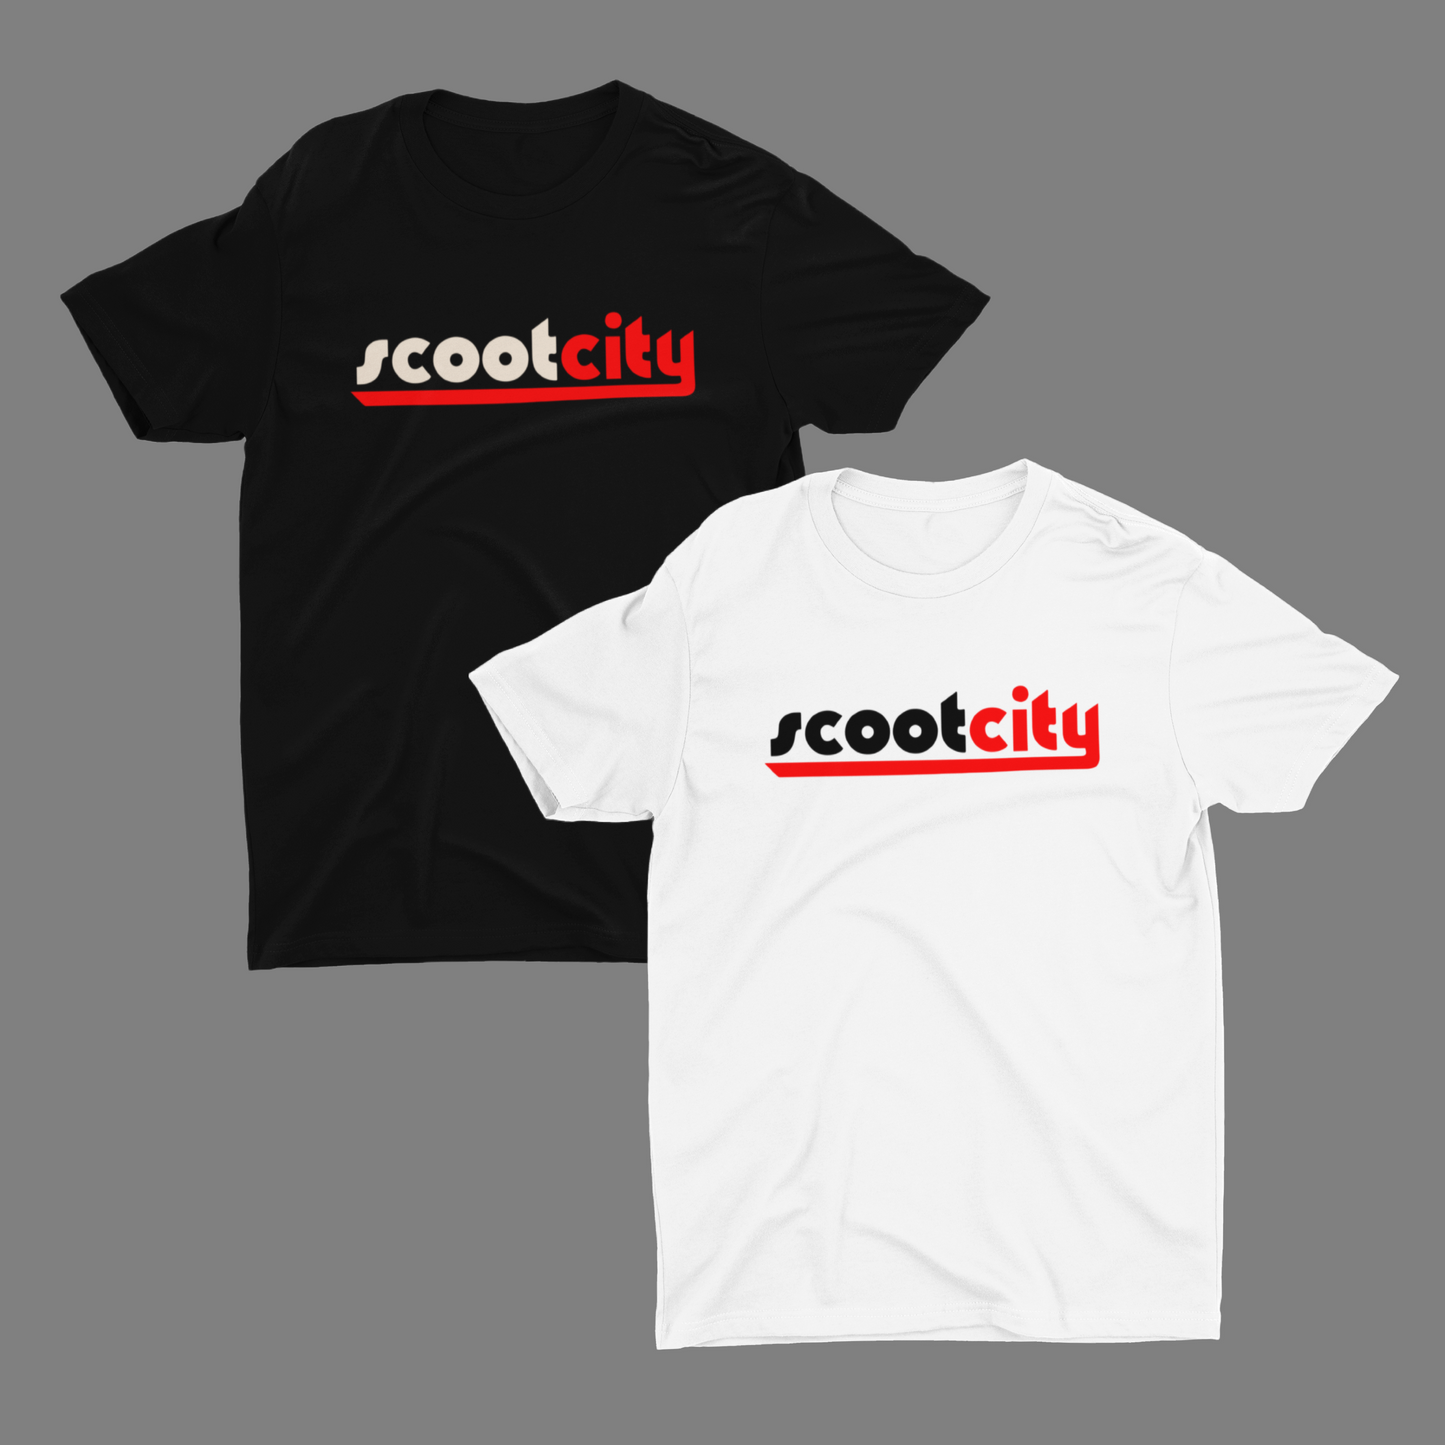 SCOOT CITY T-Shirt PRE-ORDER (SHIPS IN 2-3 WEEKS)